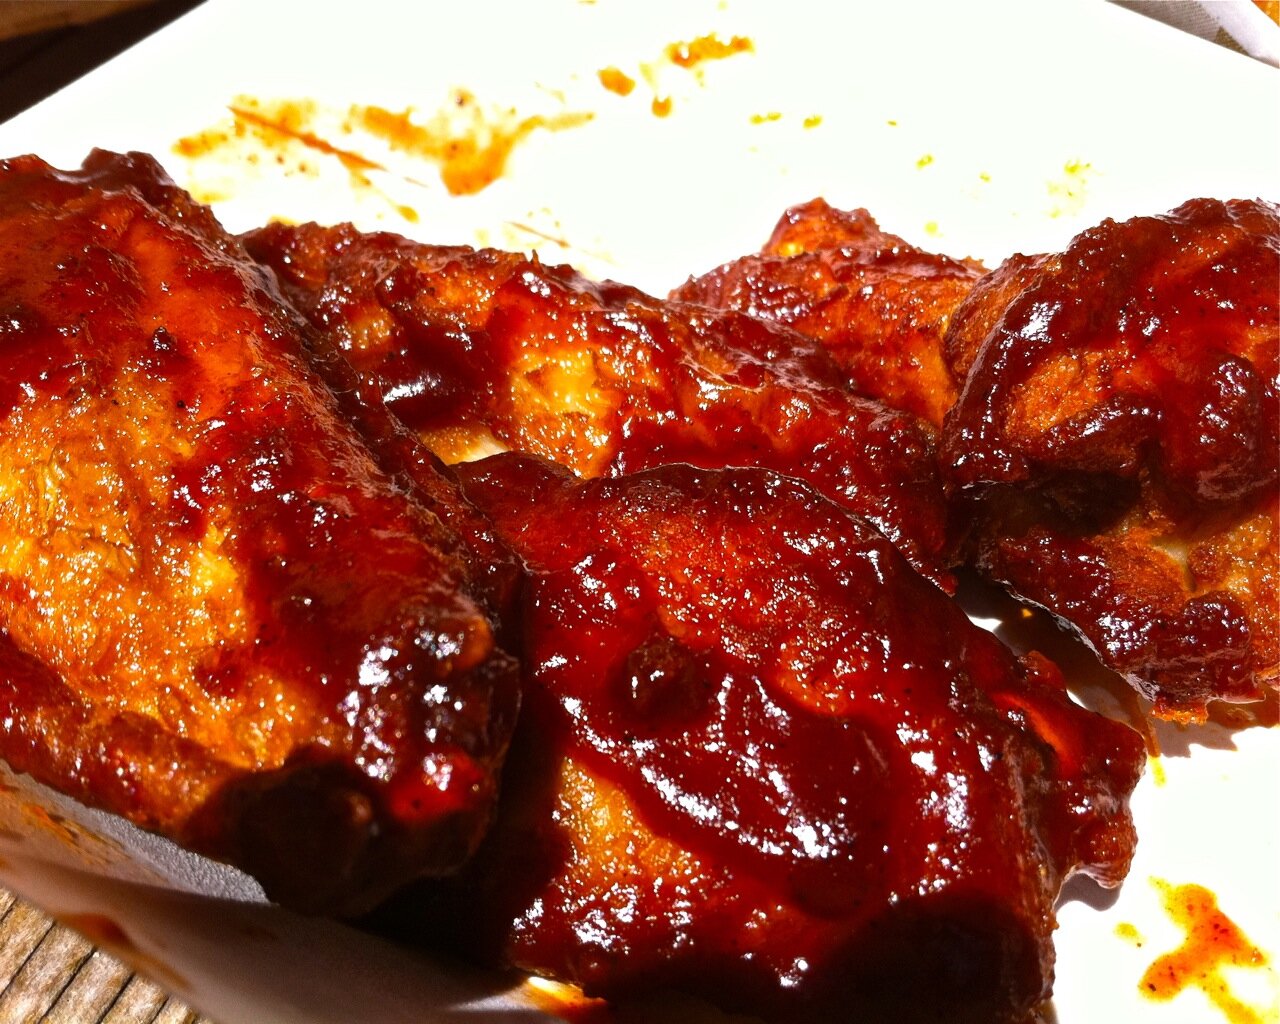 Chicken wings, slathered in BBQ goodness